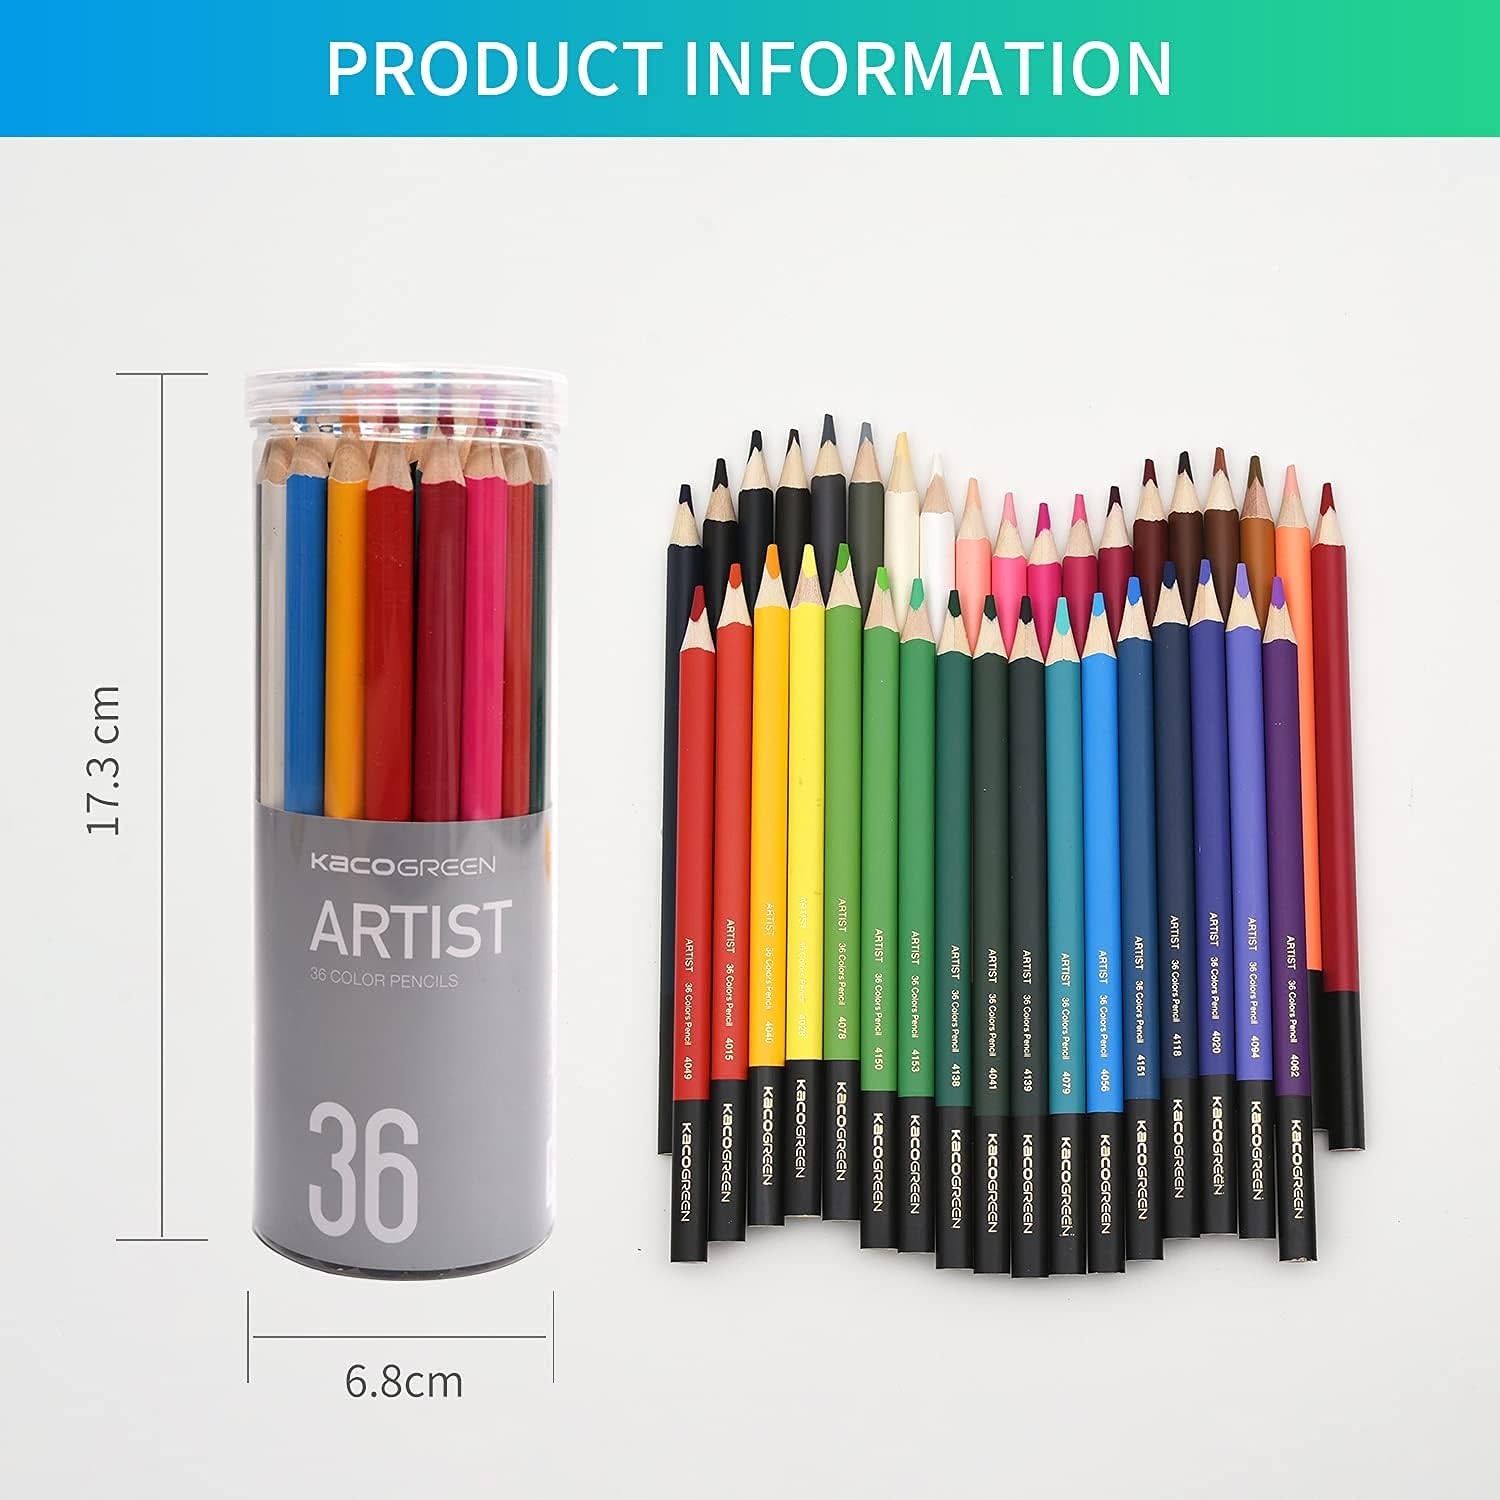 Kaco 36 Colored Soft Core Art Drawing Pencils for Sketching